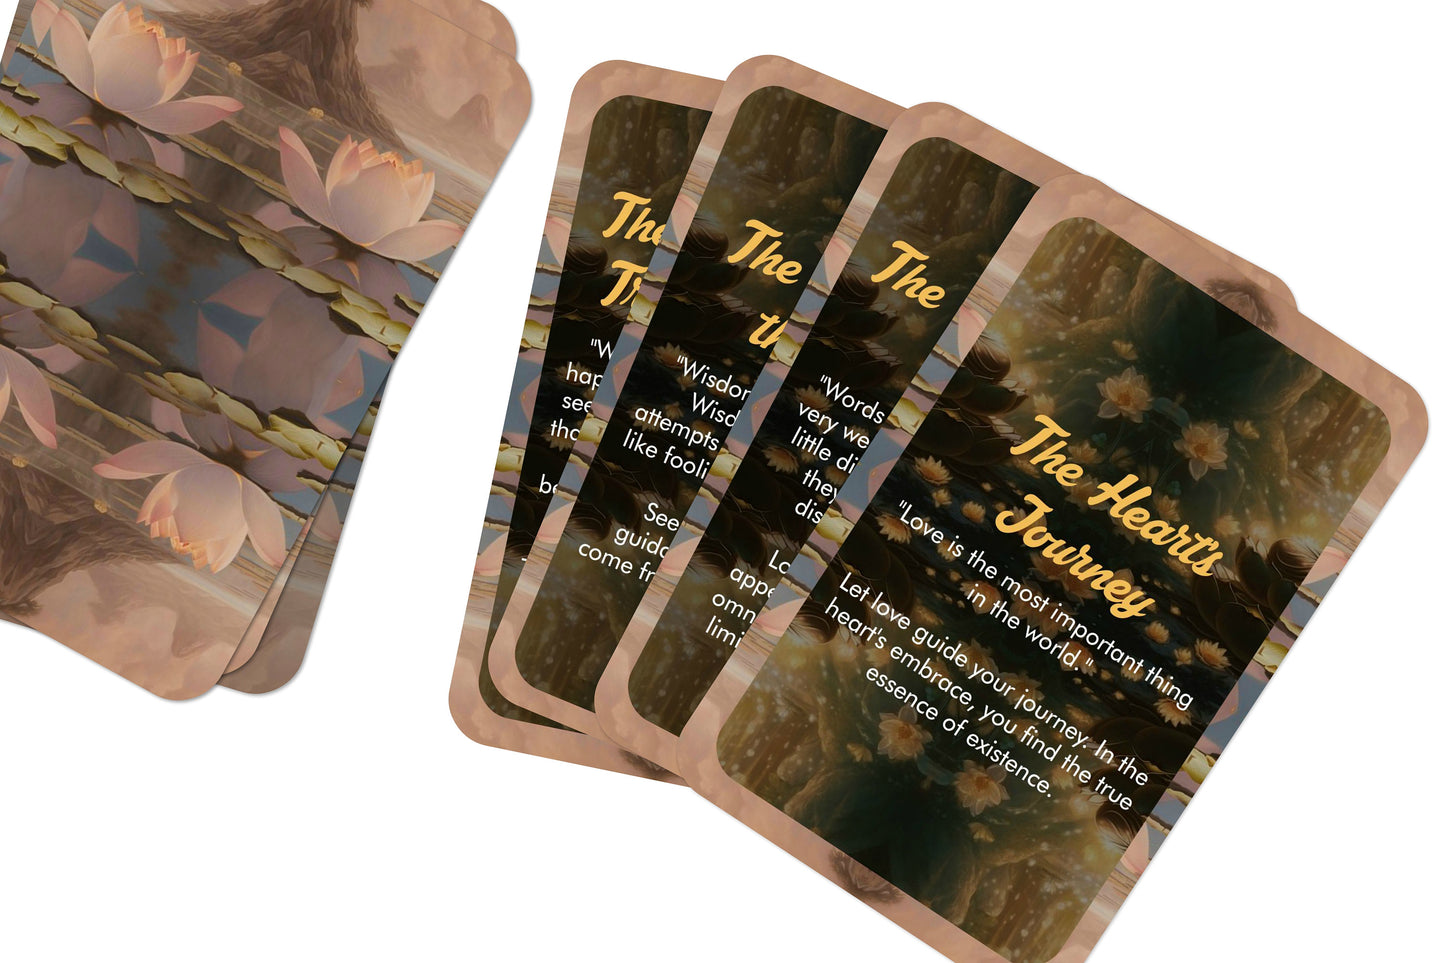 The Siddhartha Oracle - Inspired by Hermann Hesse's timeless masterpiece - Divination tools - Oracle cards